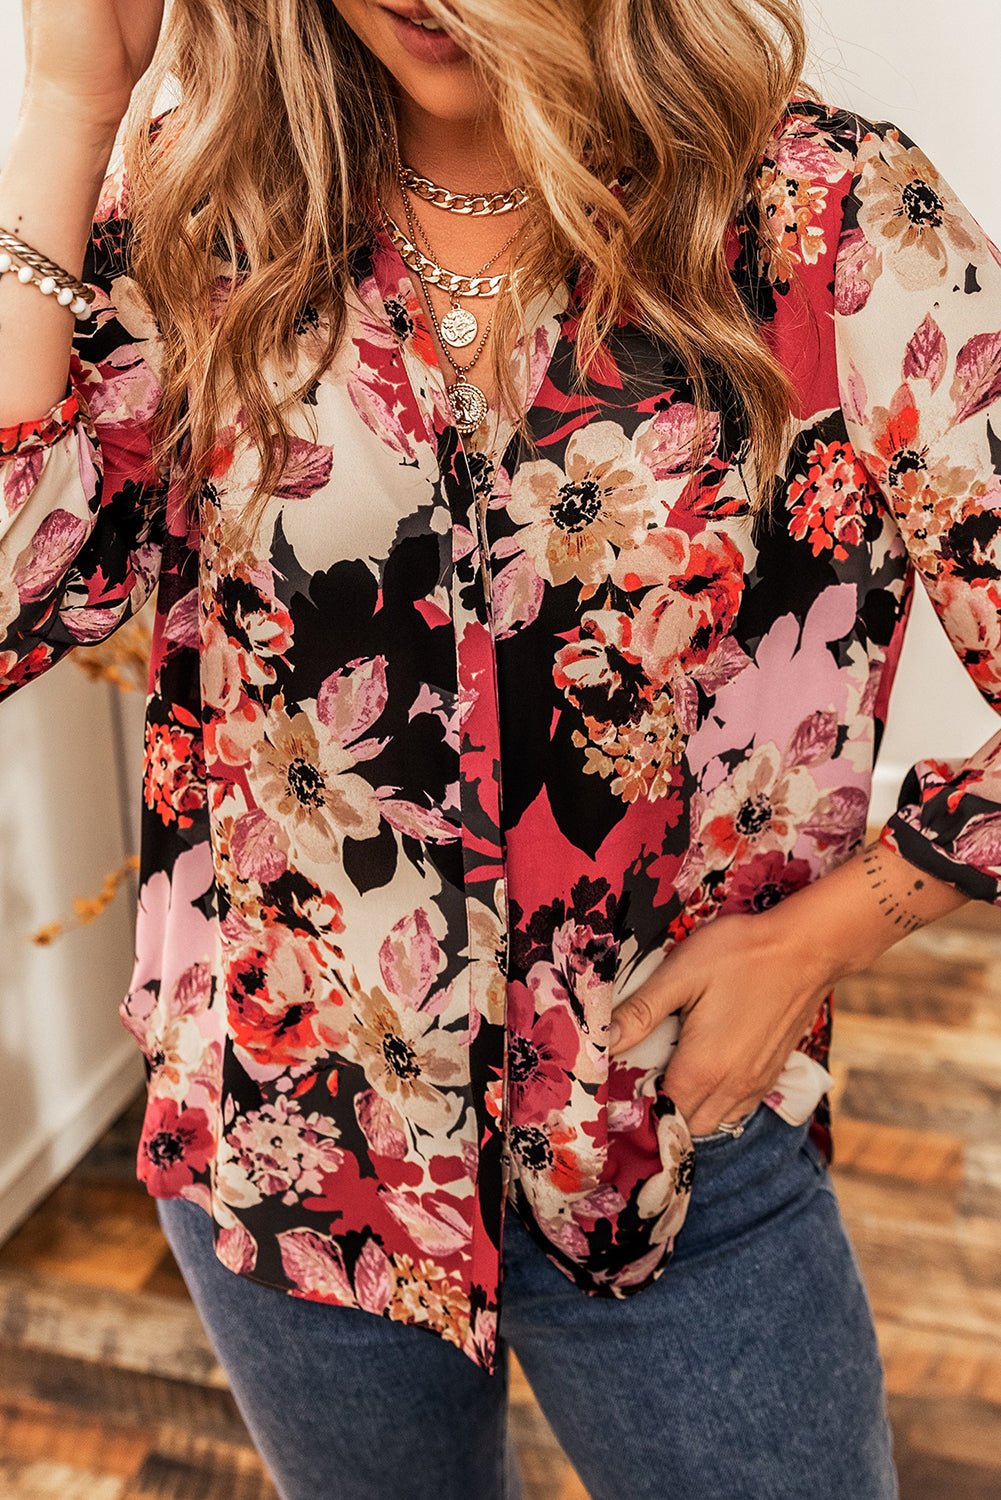 Tuscany Floral Print Top